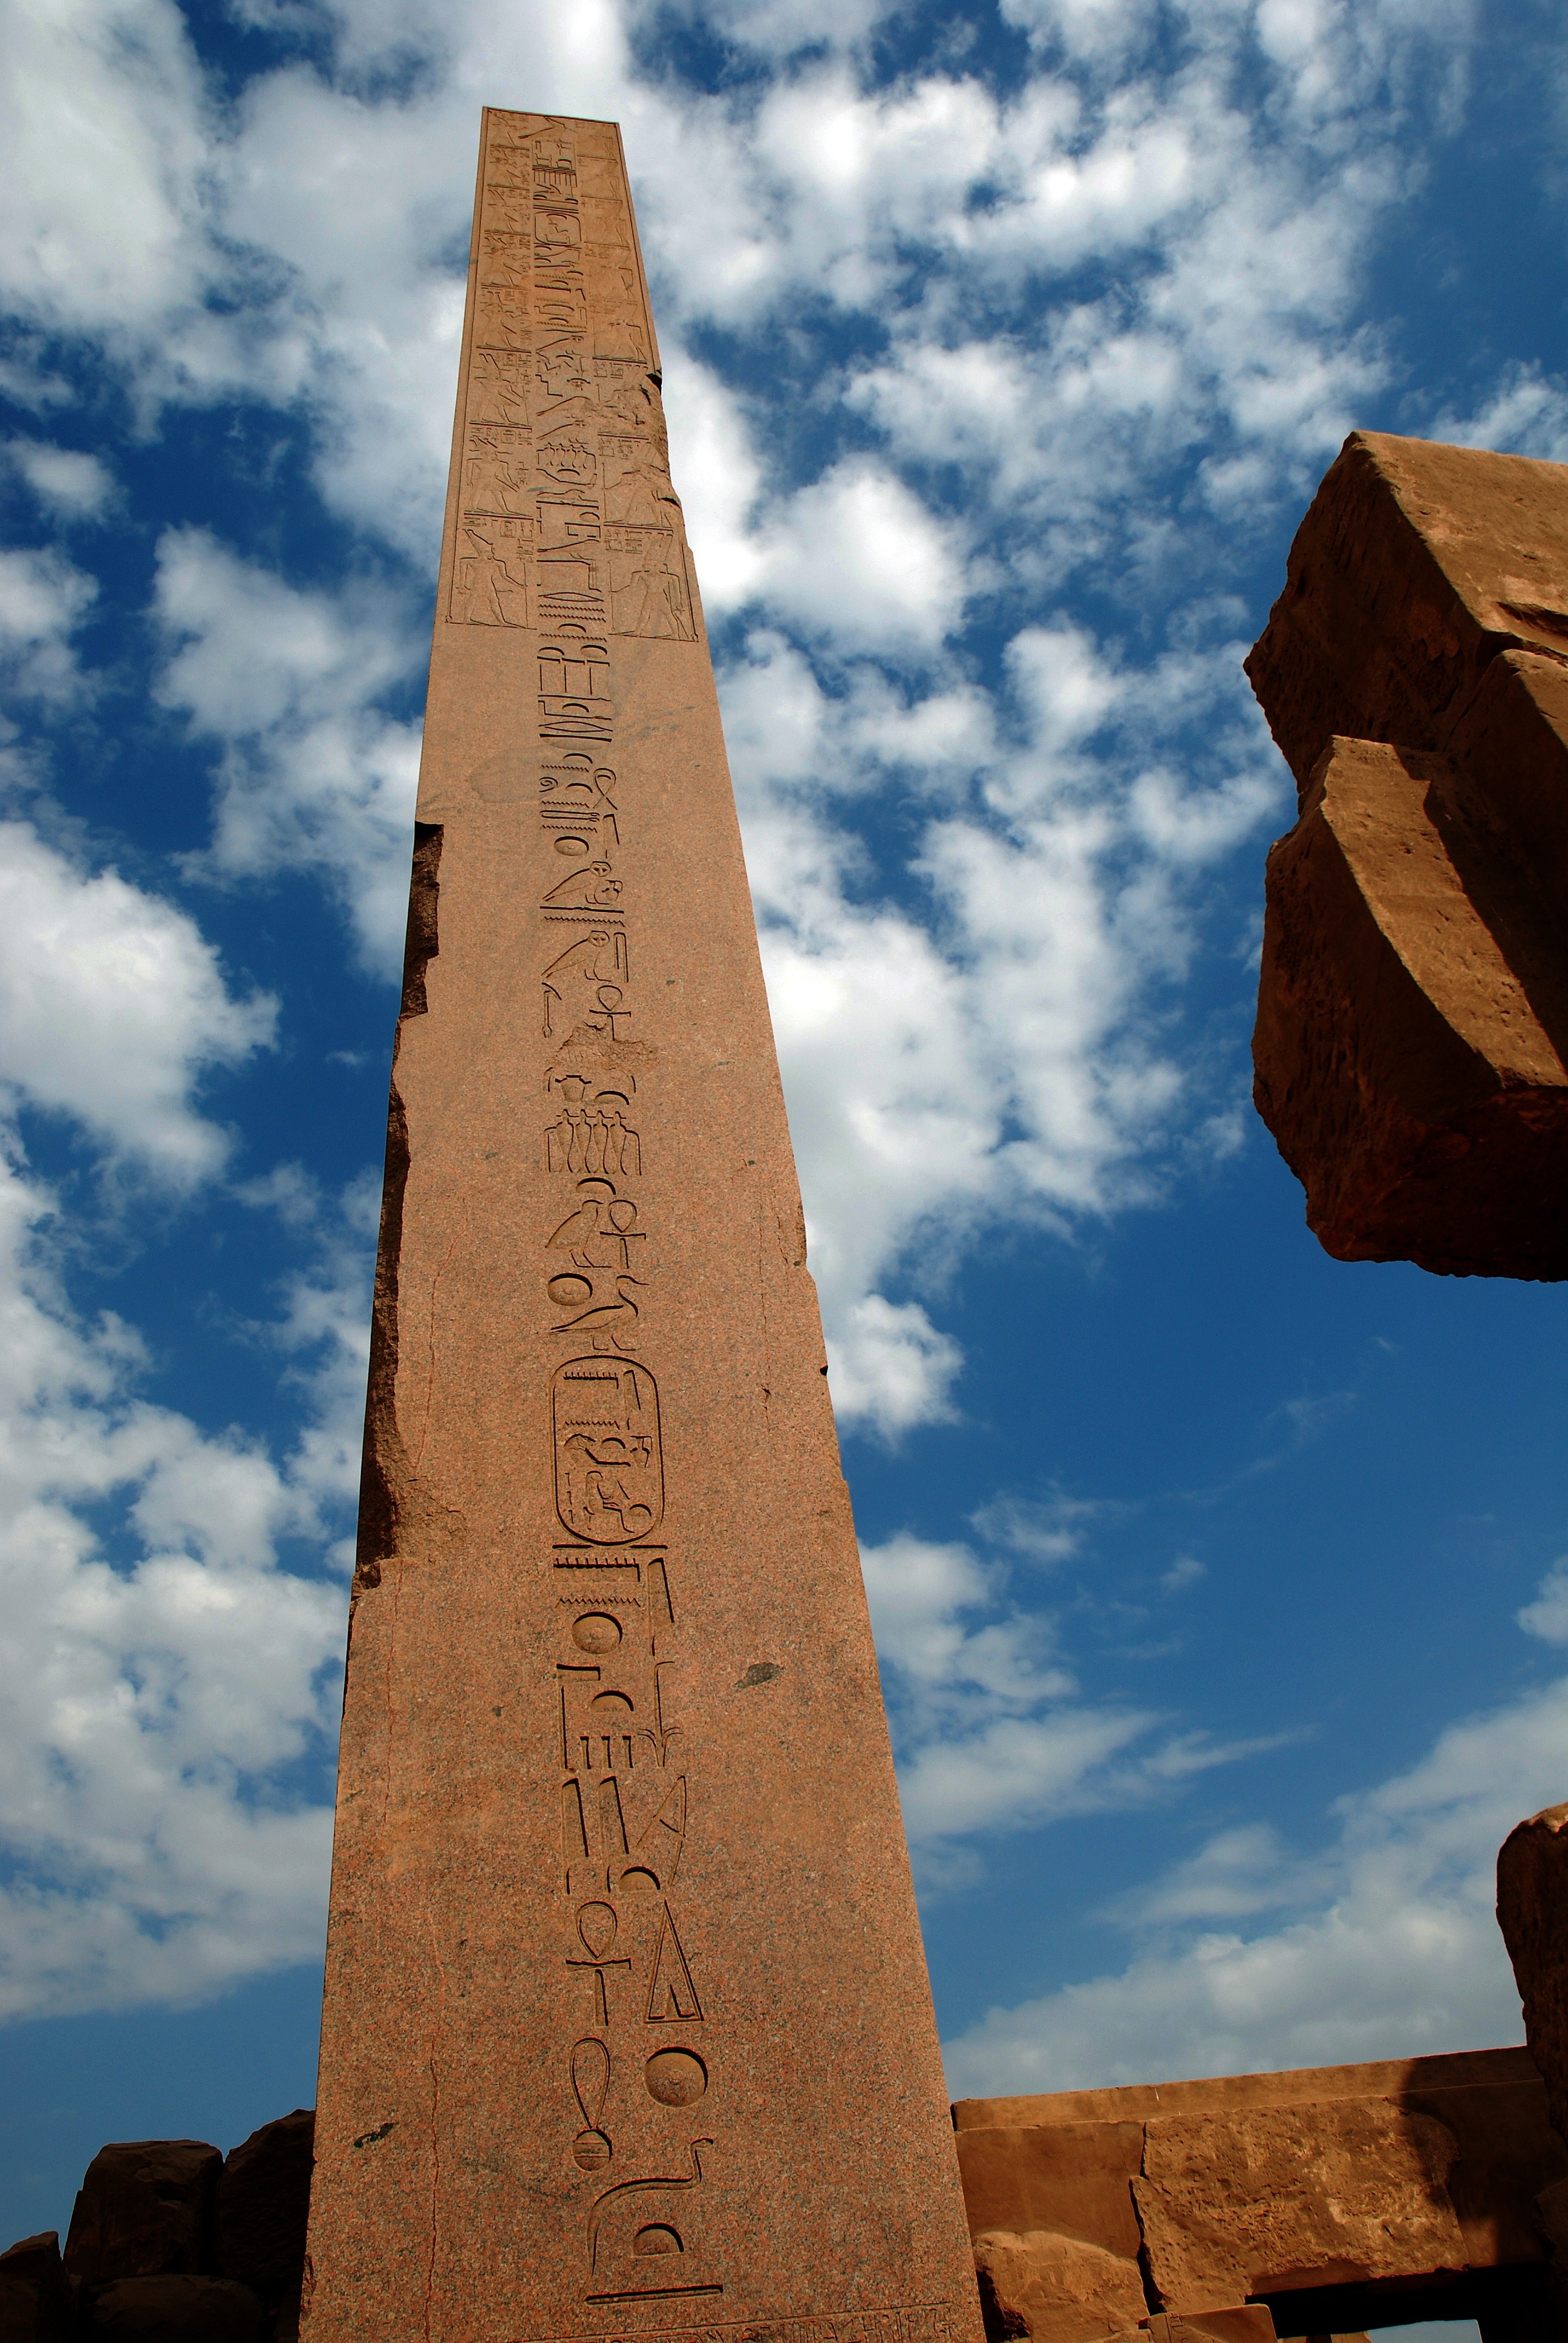 brown concrete tower with hieroglyphics embossed